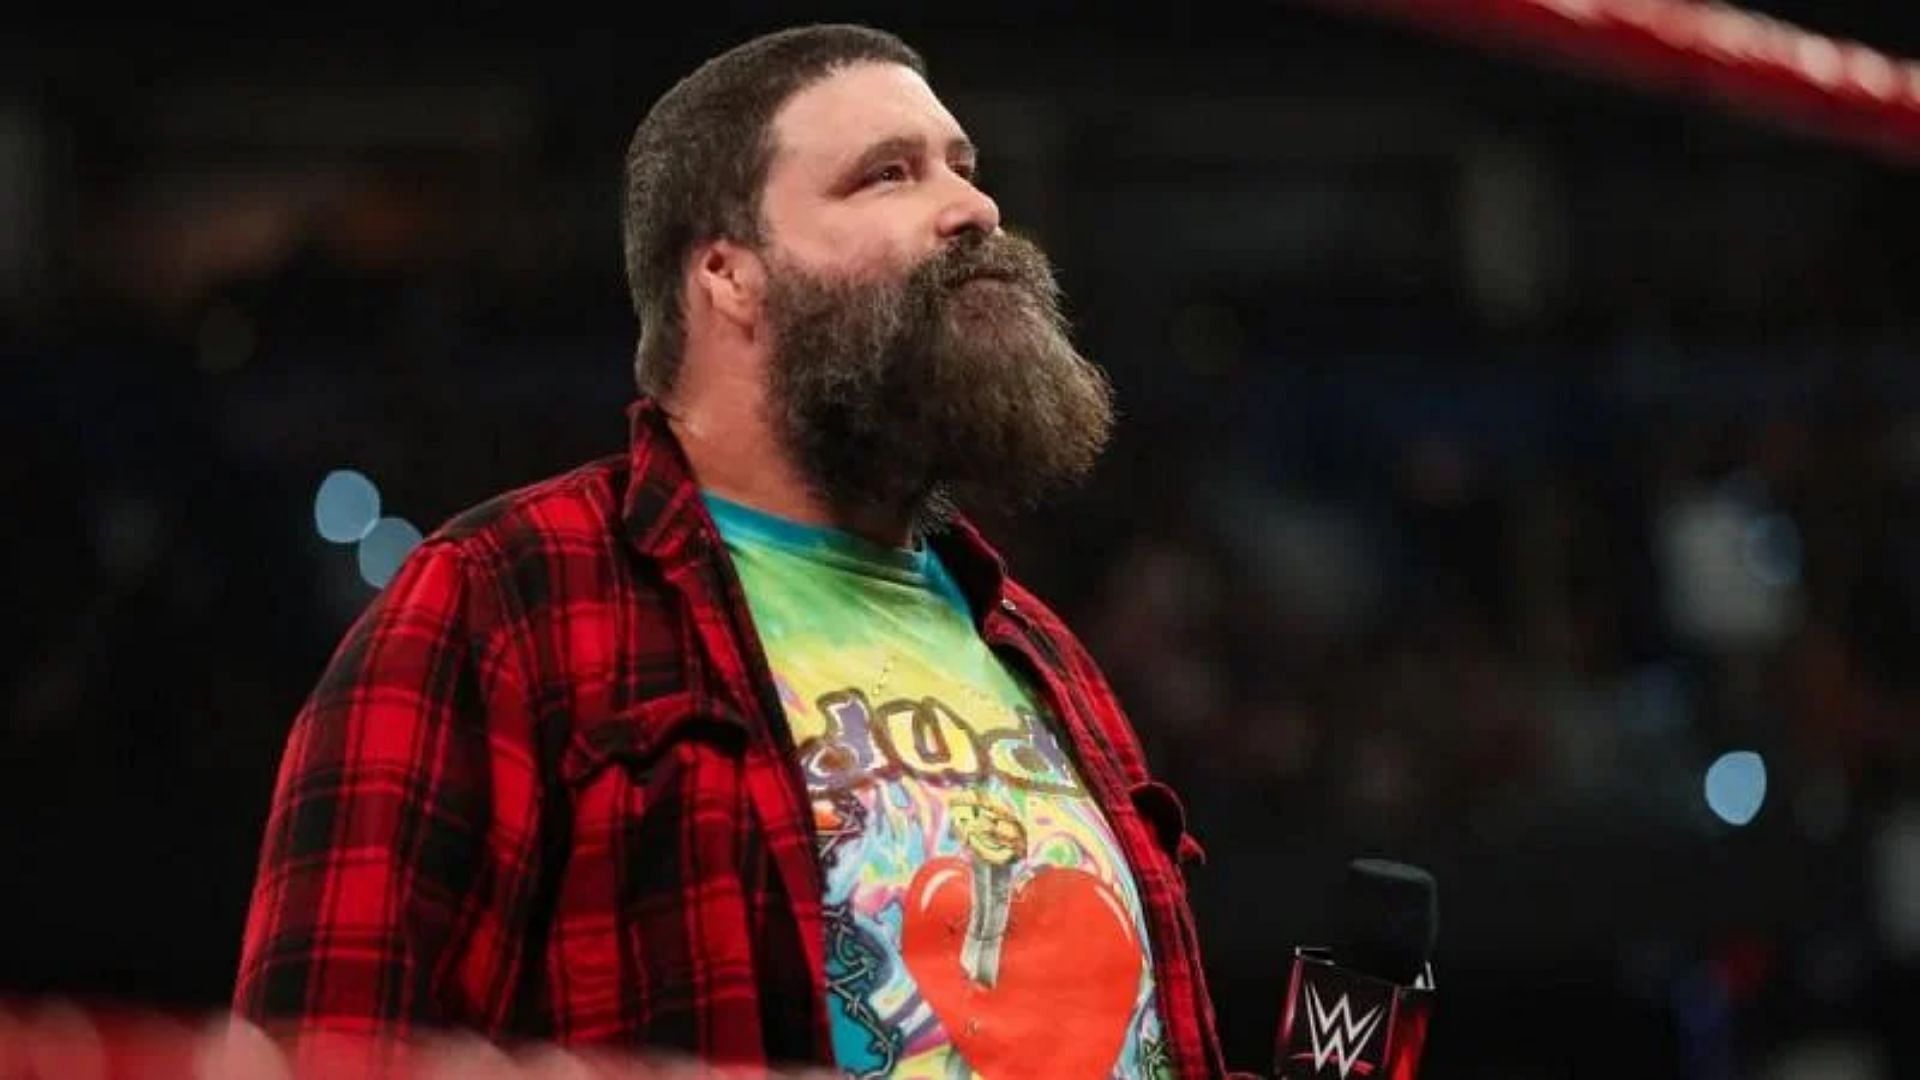 Mick Foley joined the WWE Hall of Fame in 2013.